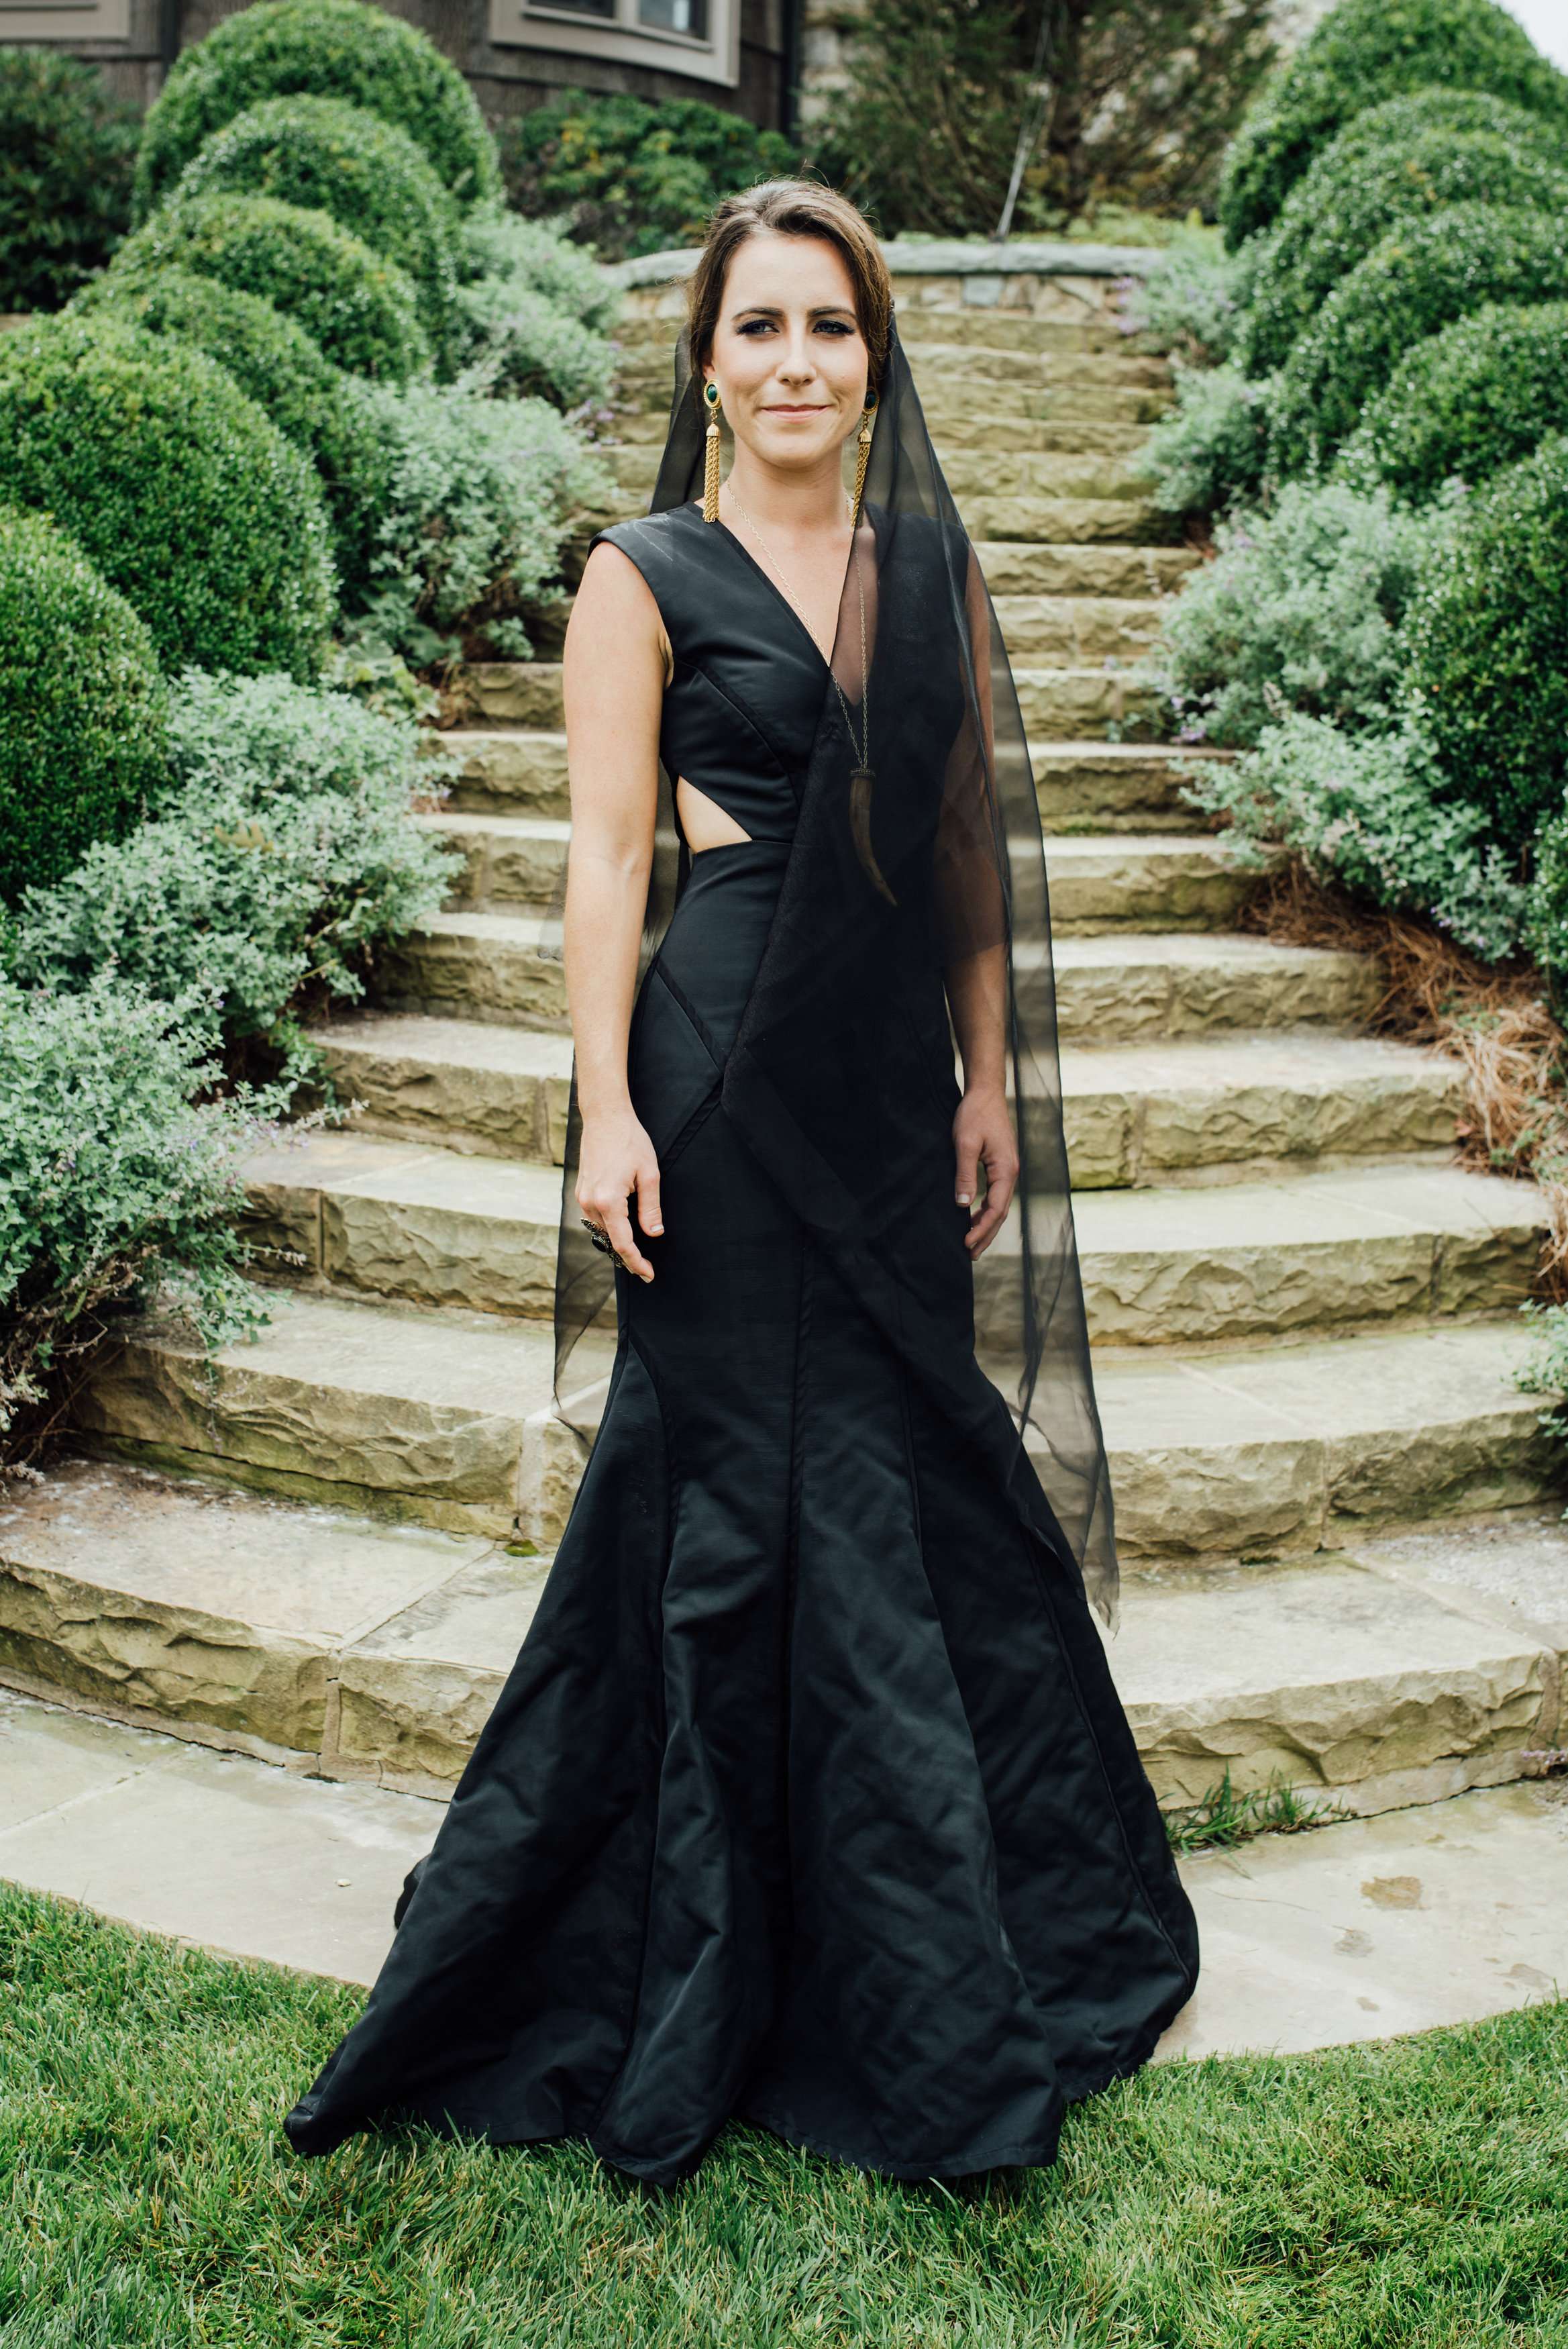  Game of Thrones Editorial Shoot by Whiskey &amp; White Events. At the Old Edwards Inn in Highlands, NC.&nbsp;  Photo by Cameron Reynolds Photography  Design &amp; Styling by Whiskey &amp; White Events  Model is Morgan Cole  Dress by Rent the Runway 